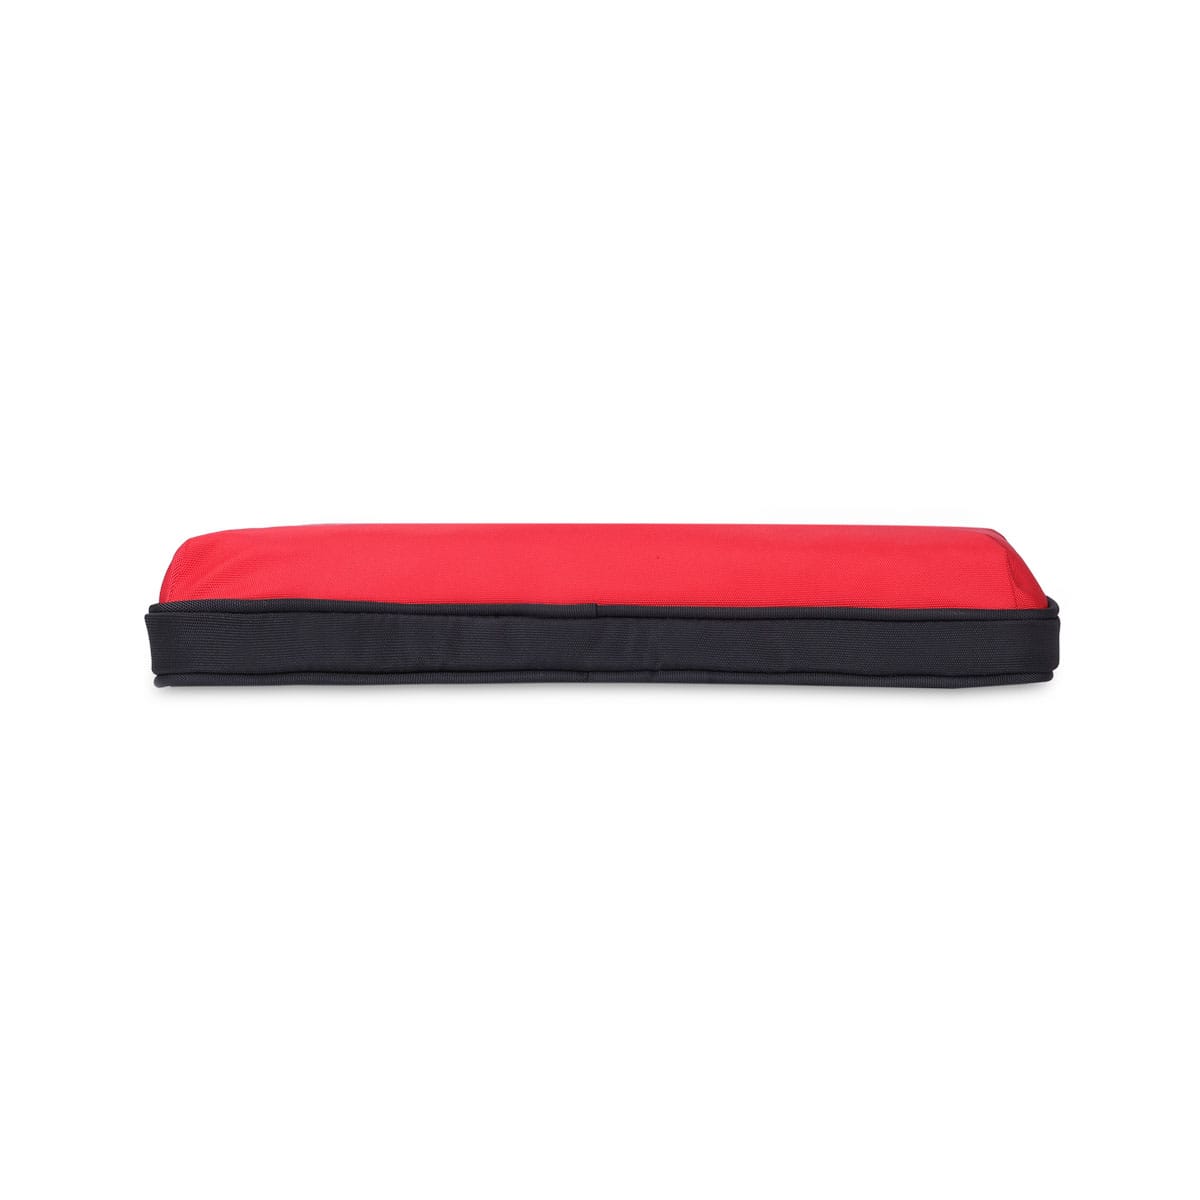 Black-Red | Protecta Perfect Timing MacBook Sleeve-4